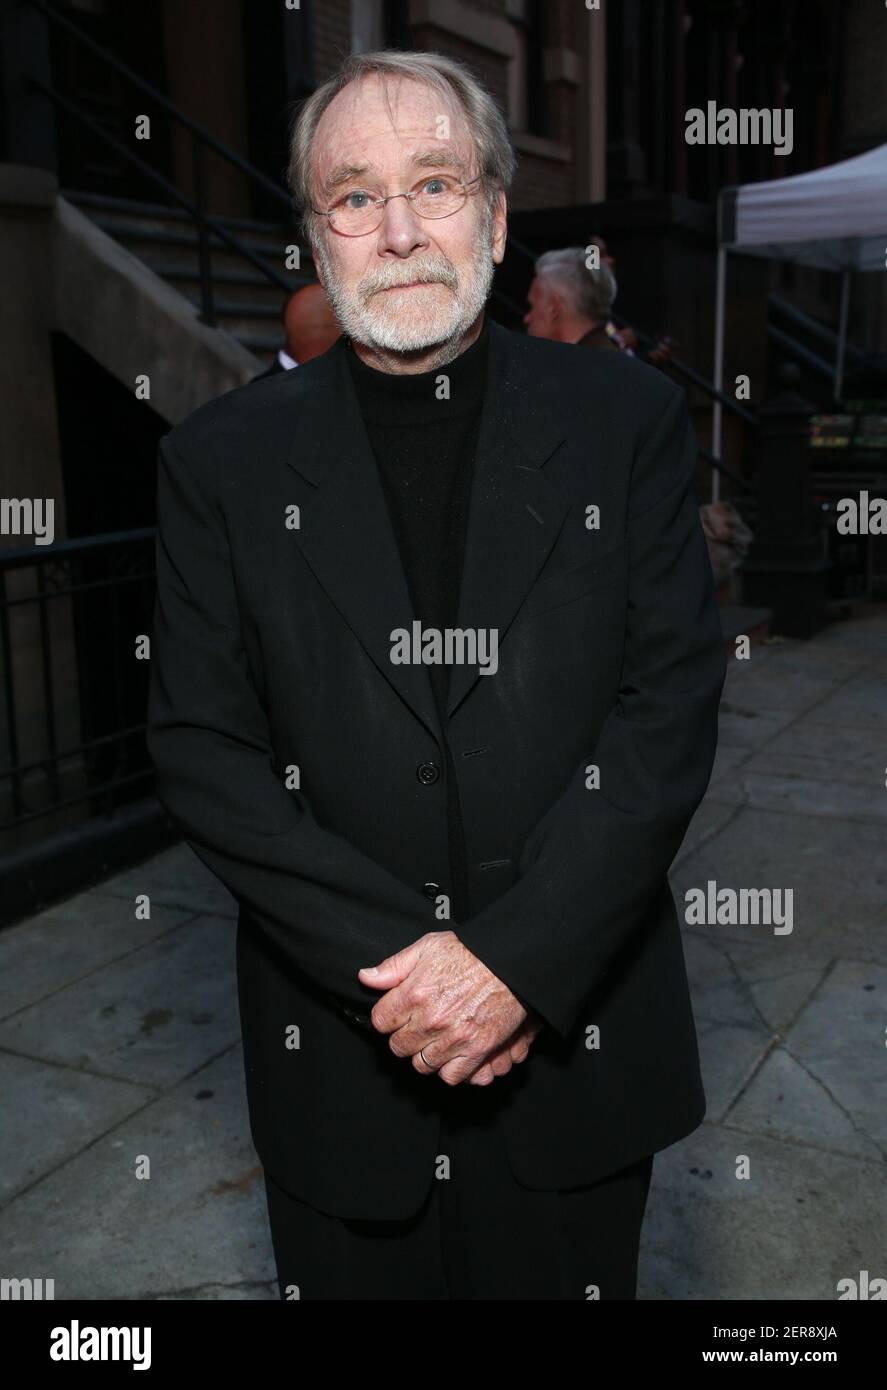 Los Angeles May 24 Martin Mull Attends The 2018 Fox La Screenings Gala And Party On The Fox Studio Lot On May 24 2018 In Los Angeles California Photo By John Salangsangfoxpicturegroupsipa Usa 2ER8XJA 